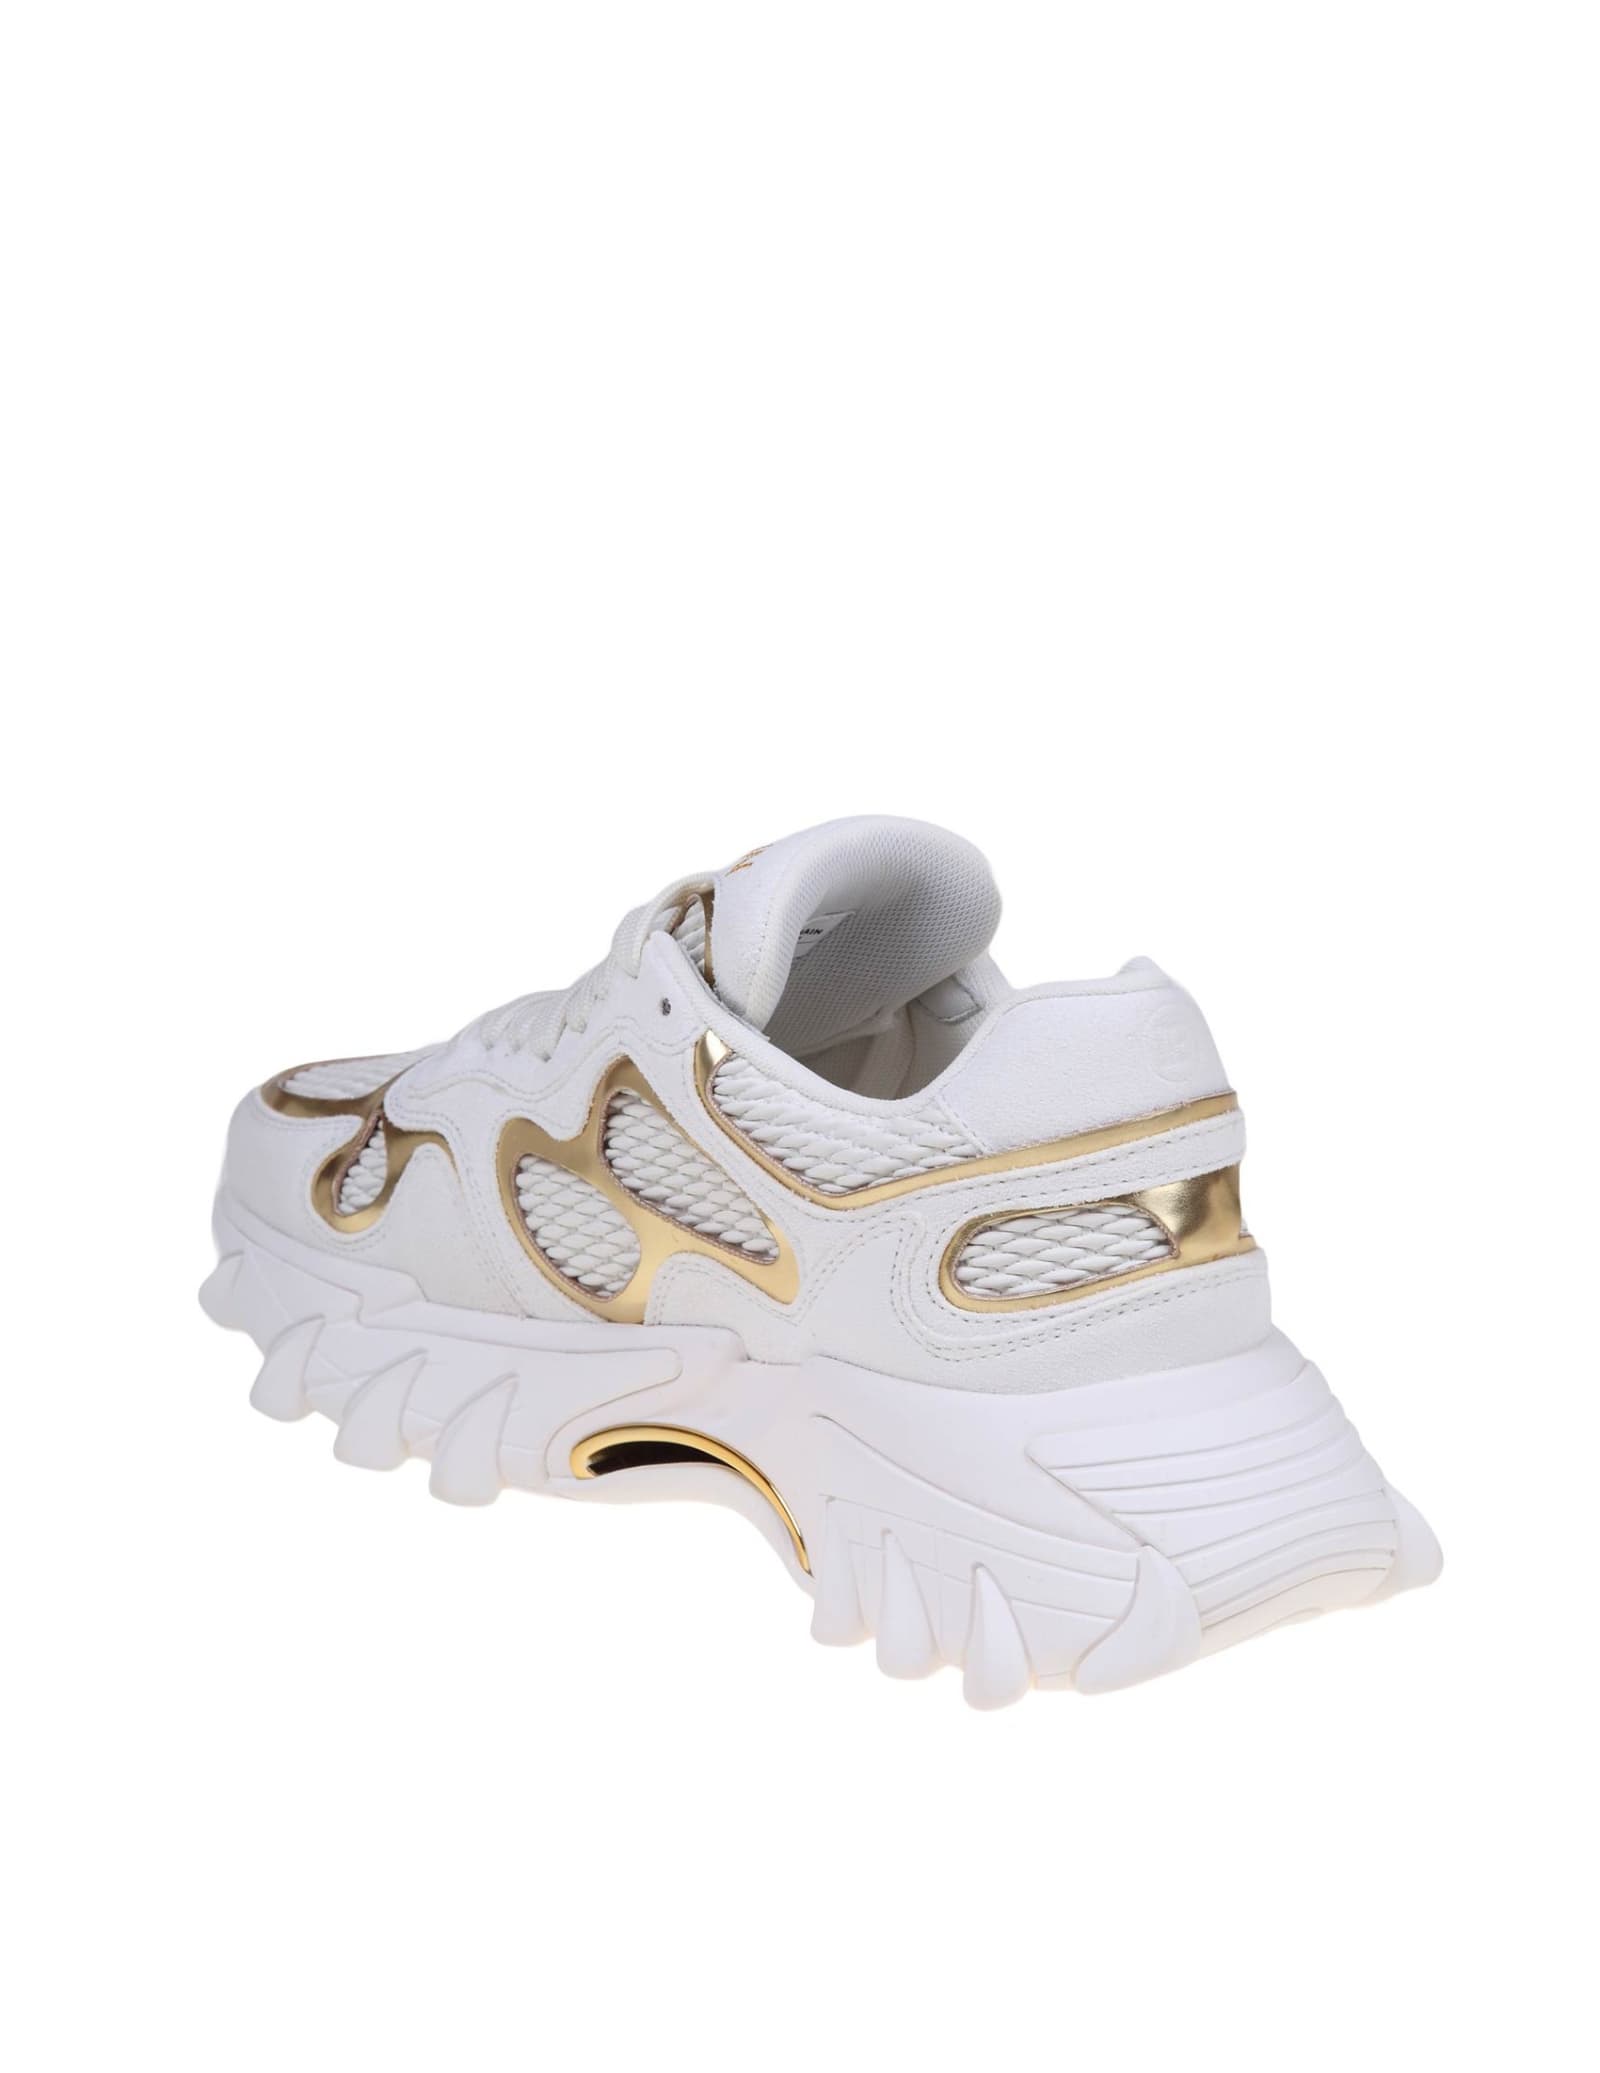 Shop Balmain B-east Sneakers In White And Gold Suede And Leather In White/gold